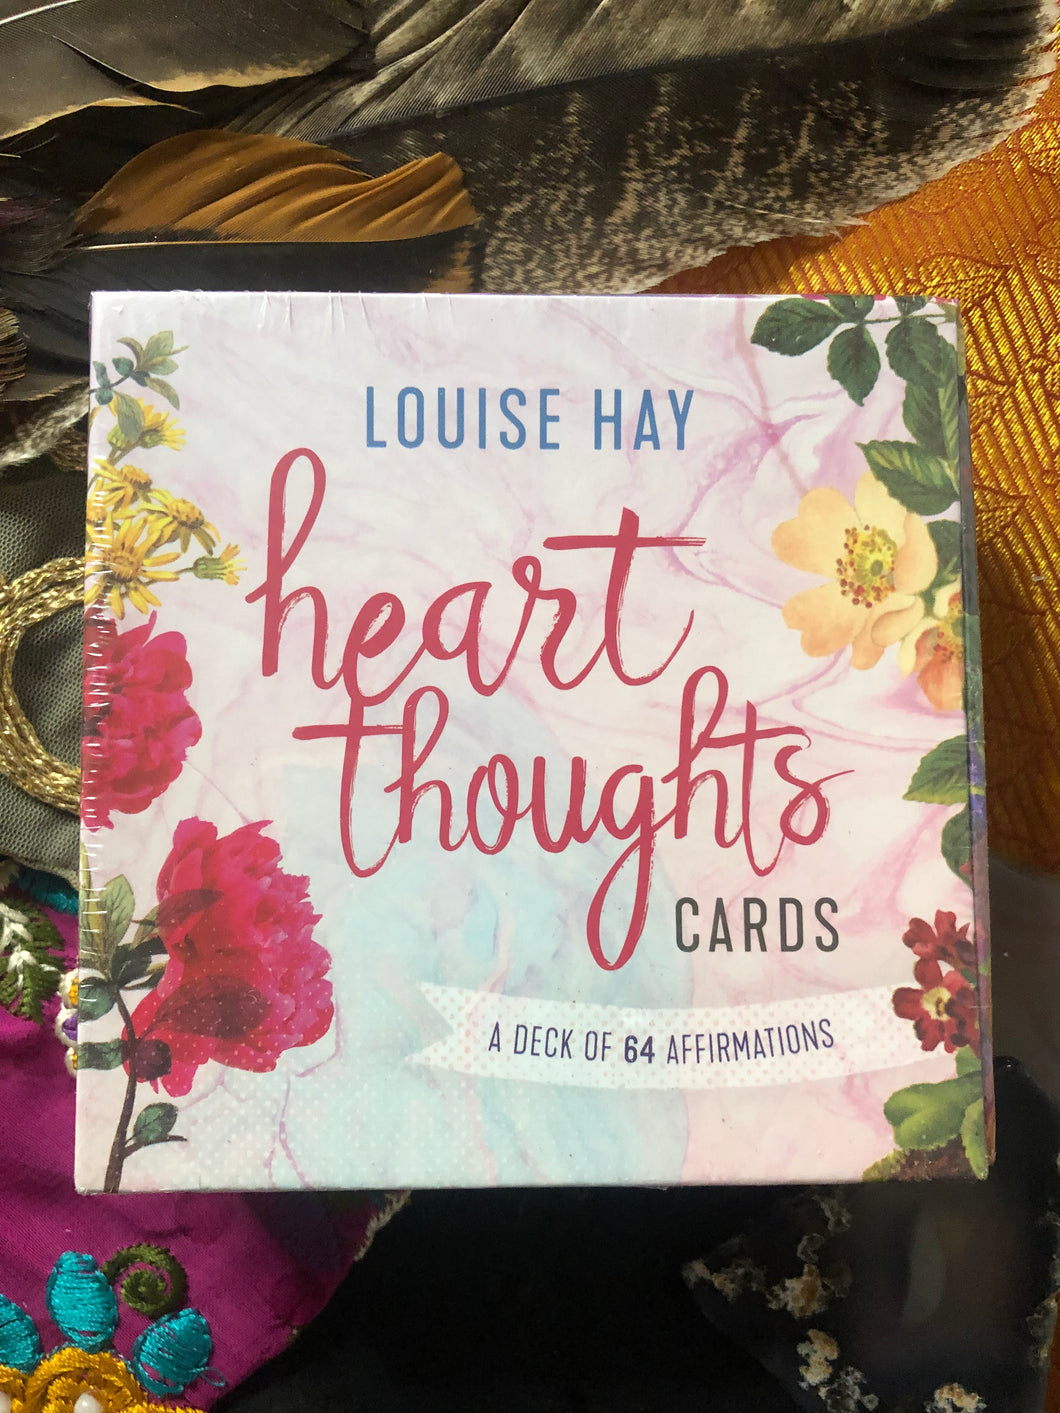 Heart Thoughts cards